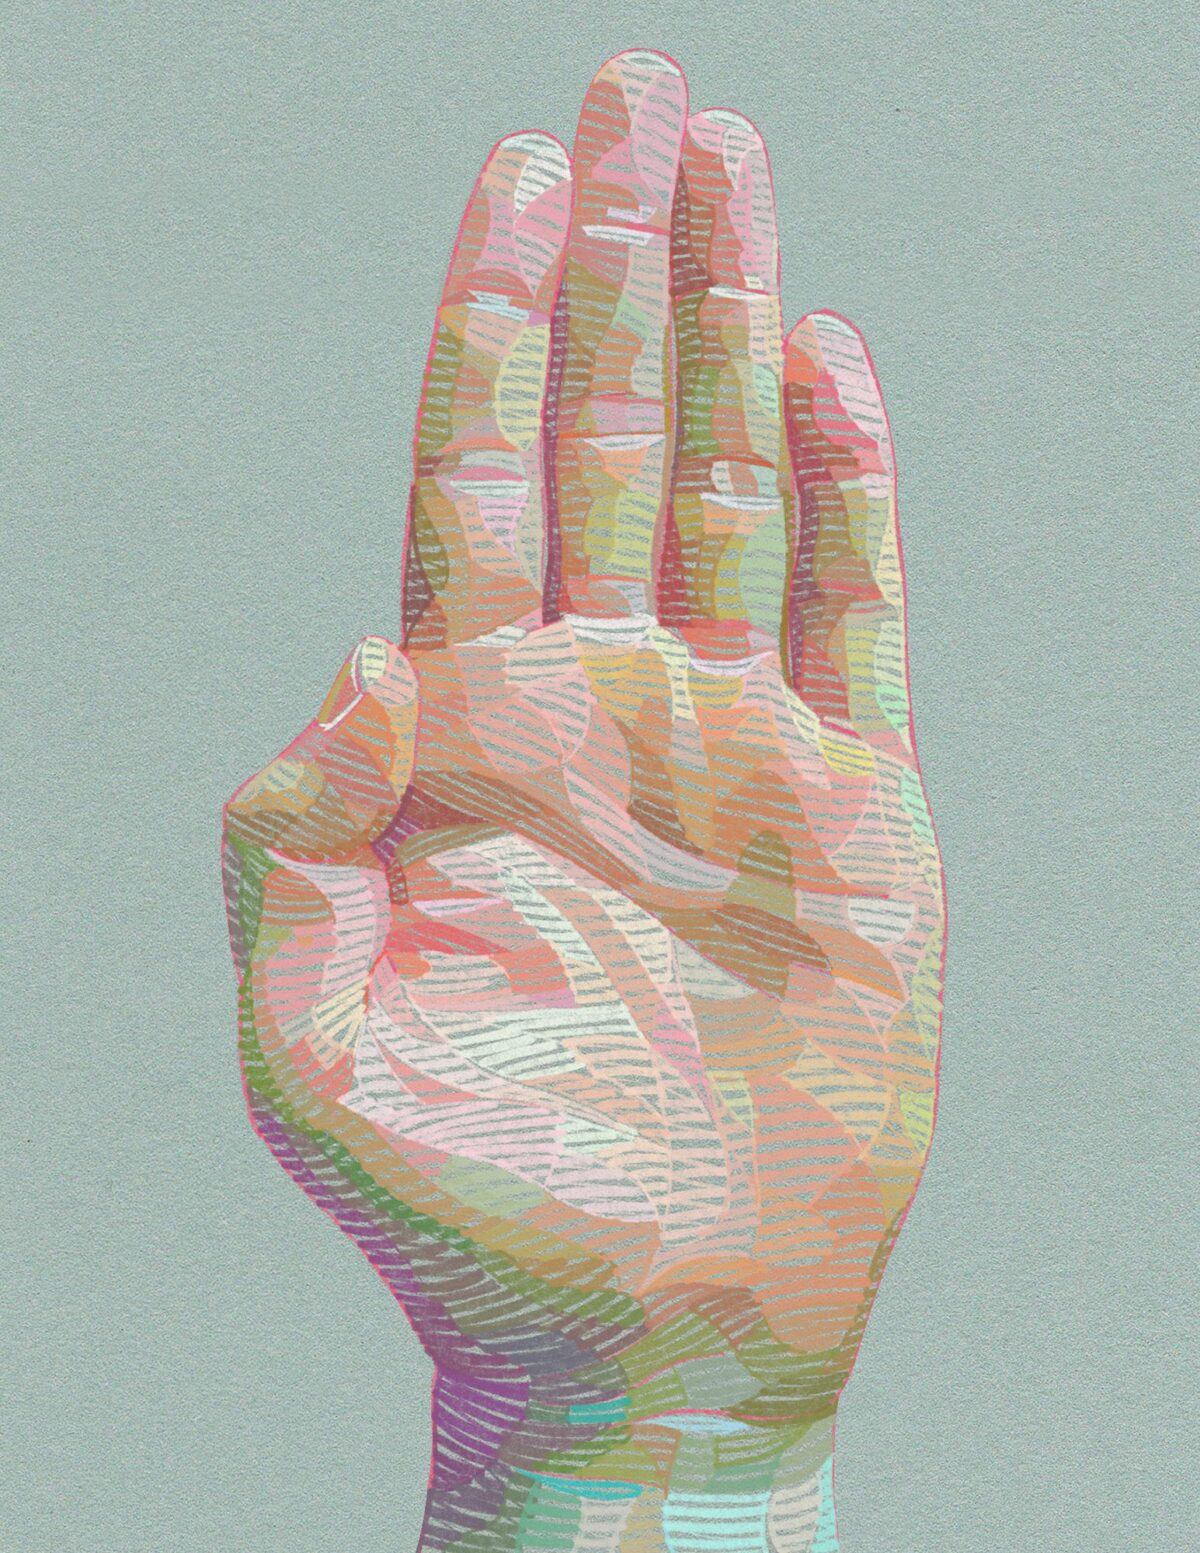 Superb Sketches Of Hands Portraits And Other Figures Composed Of Multicolored Geometric Forms By Lui Ferreyra 18